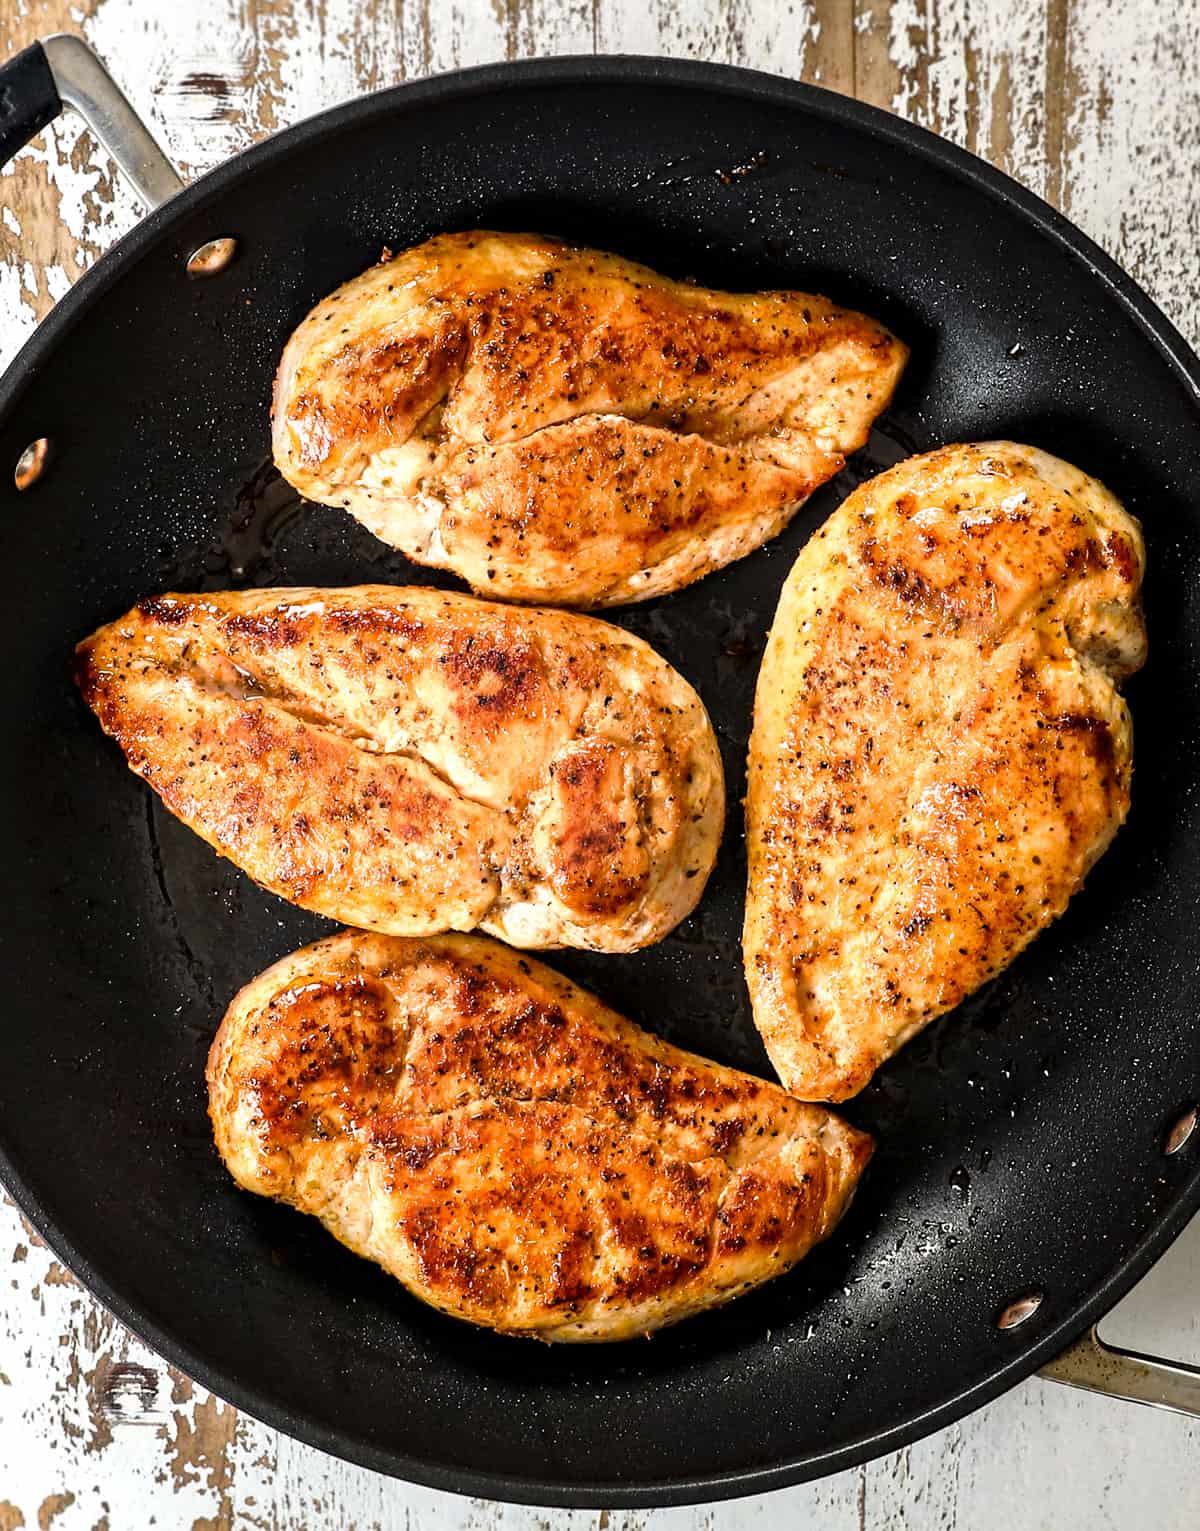 showing how to make shredded chicken by searing the chicken breasts in a nonstick skillet